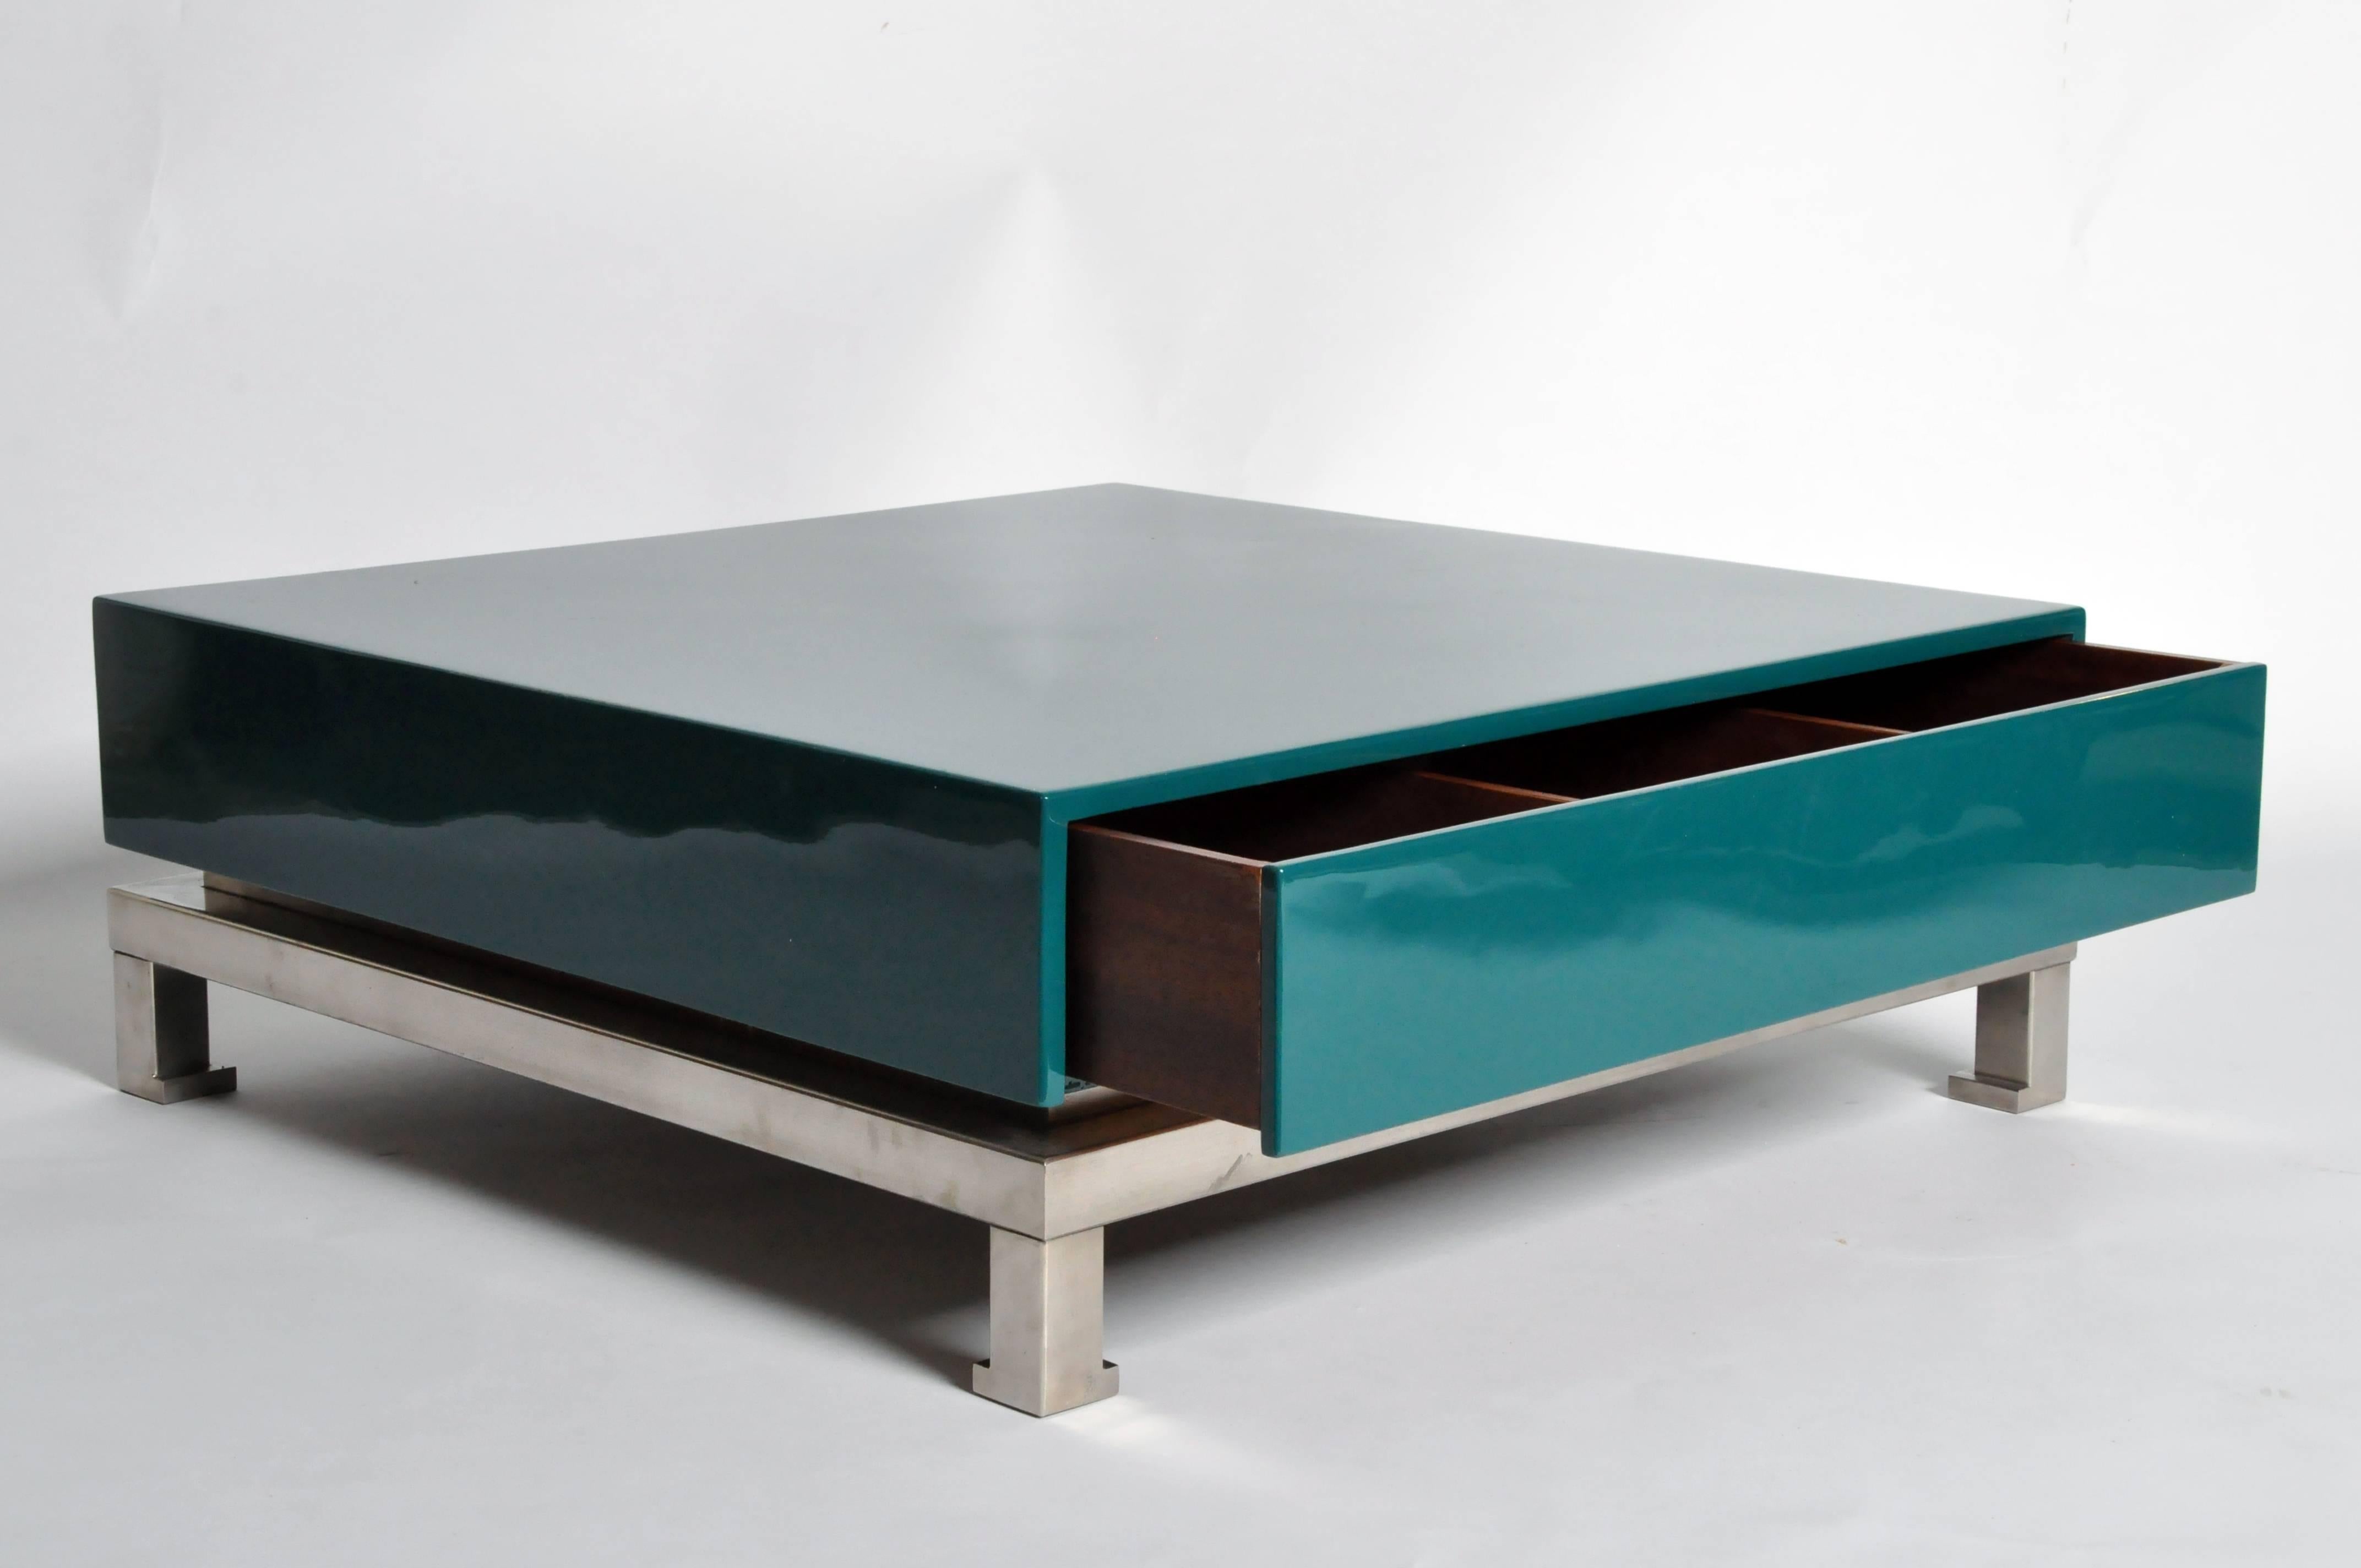 These glamorous low tables have pullout drawers hidden in their glossy teal lacquered bodies and are raised on hoofed feet.